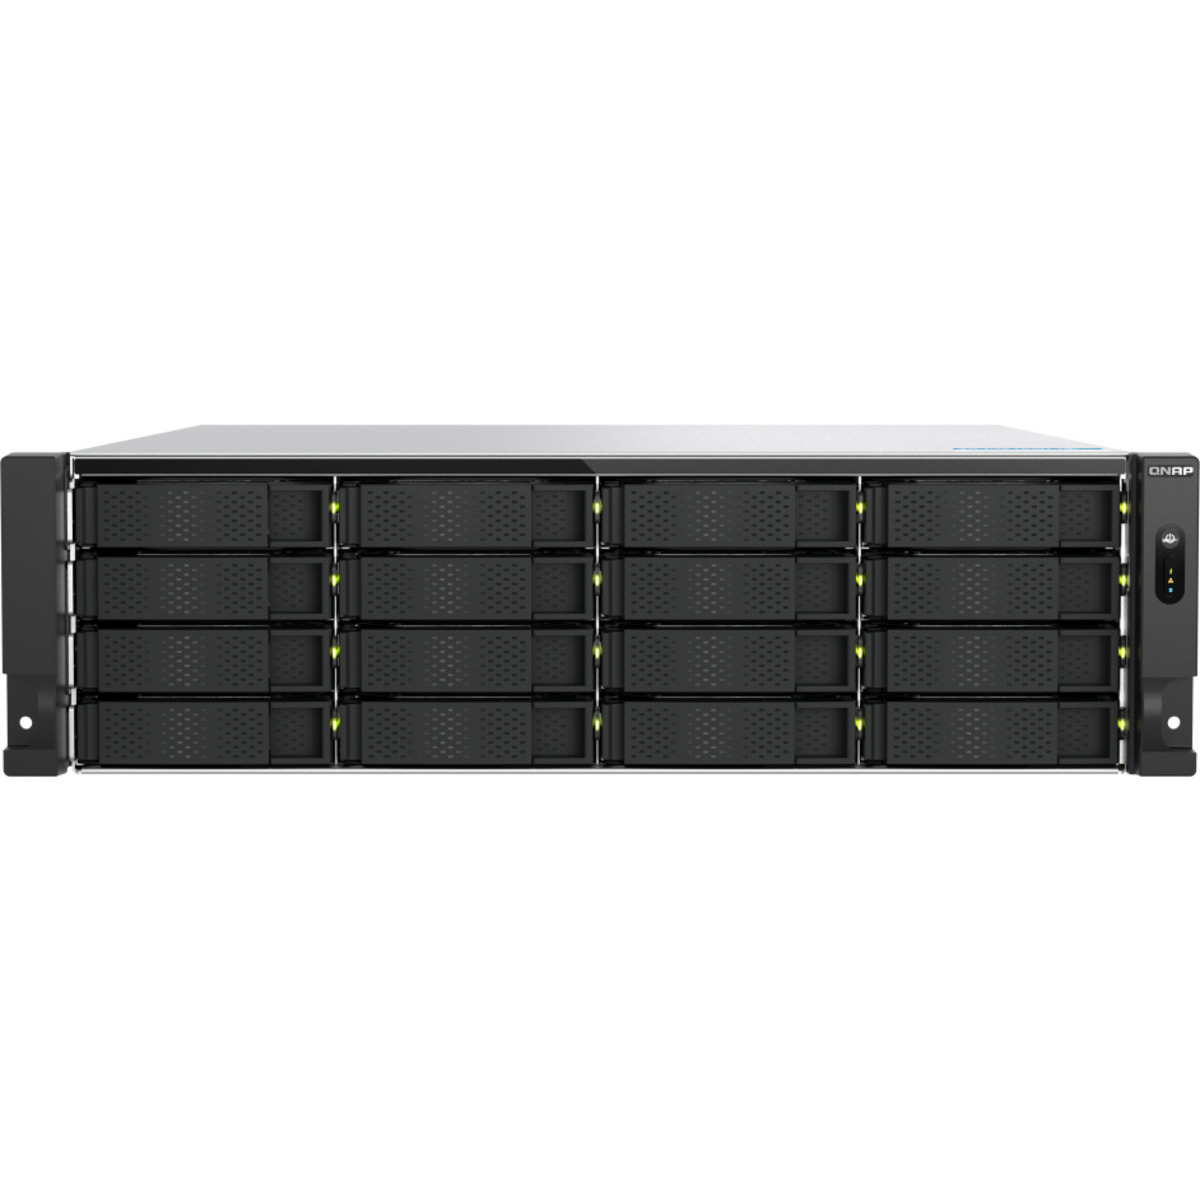 QNAP TS-h1677AXU-RP QUTS hero Ryzen 7 78tb 16-Bay RackMount Large Business / Enterprise NAS - Network Attached Storage Device 13x6tb Western Digital Red Plus WD60EFPX 3.5 5640rpm SATA 6Gb/s HDD NAS Class Drives Installed - Burn-In Tested TS-h1677AXU-RP QUTS hero Ryzen 7